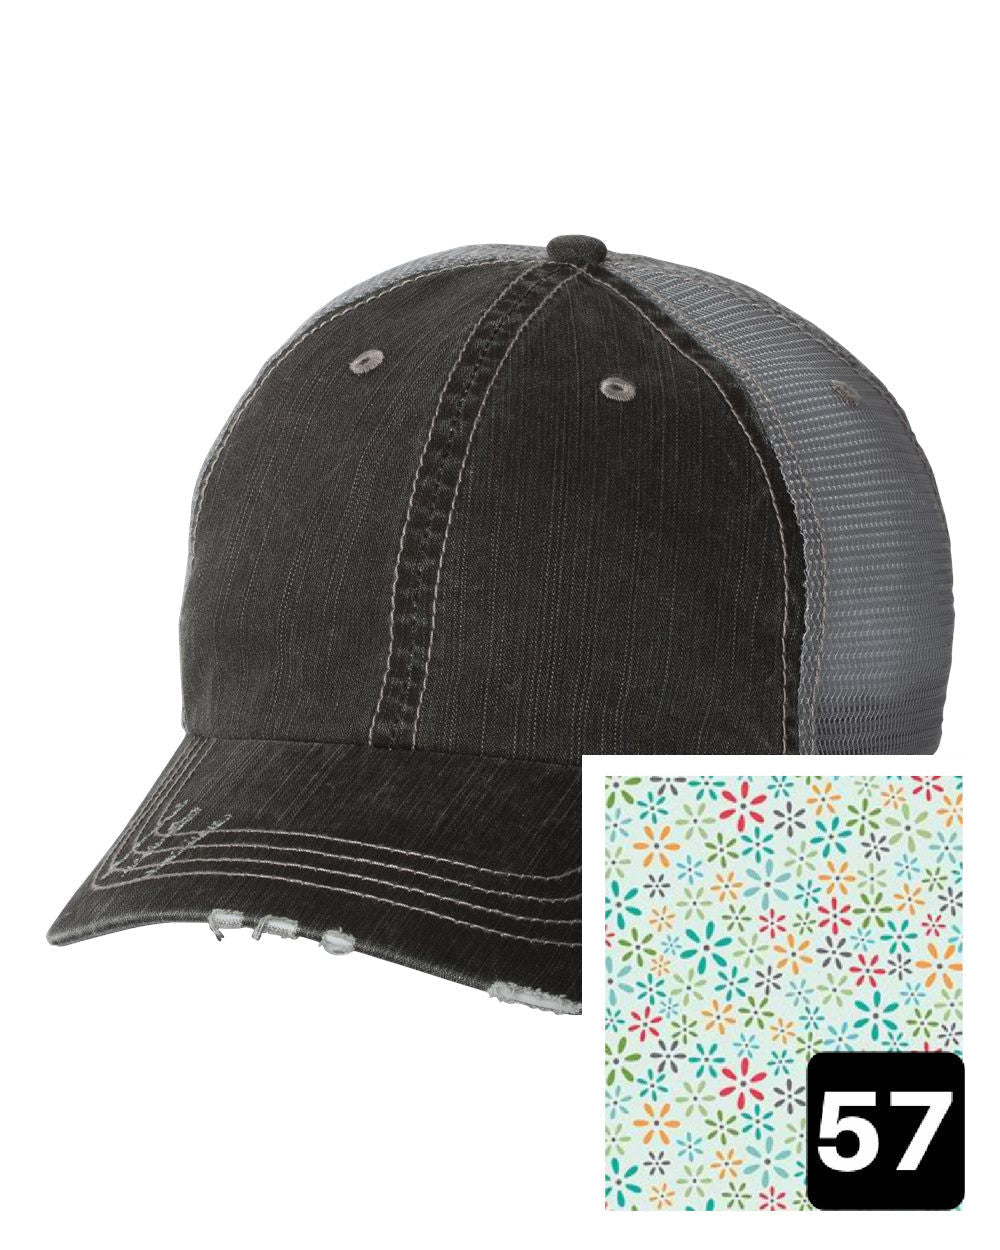 gray distressed trucker hat with white daisy on yellow fabric state of New Jersey